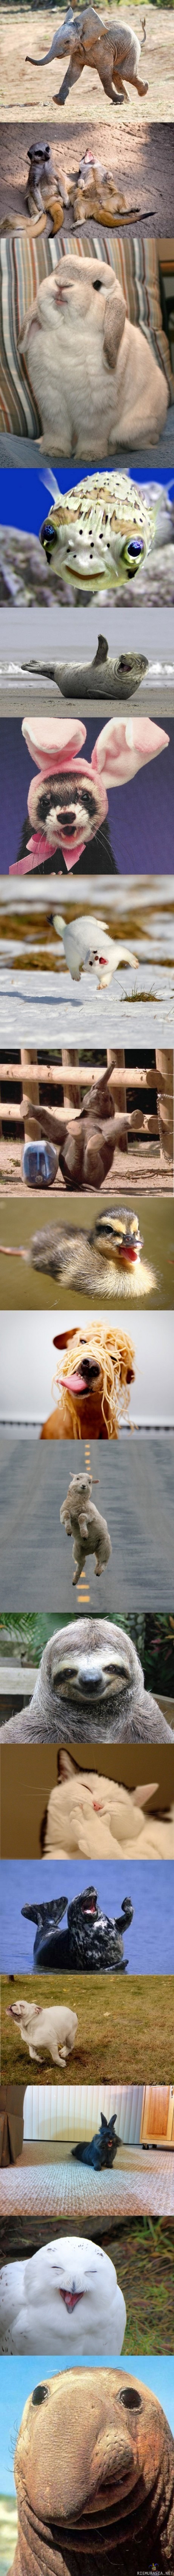 Happiest animals in the world! - -